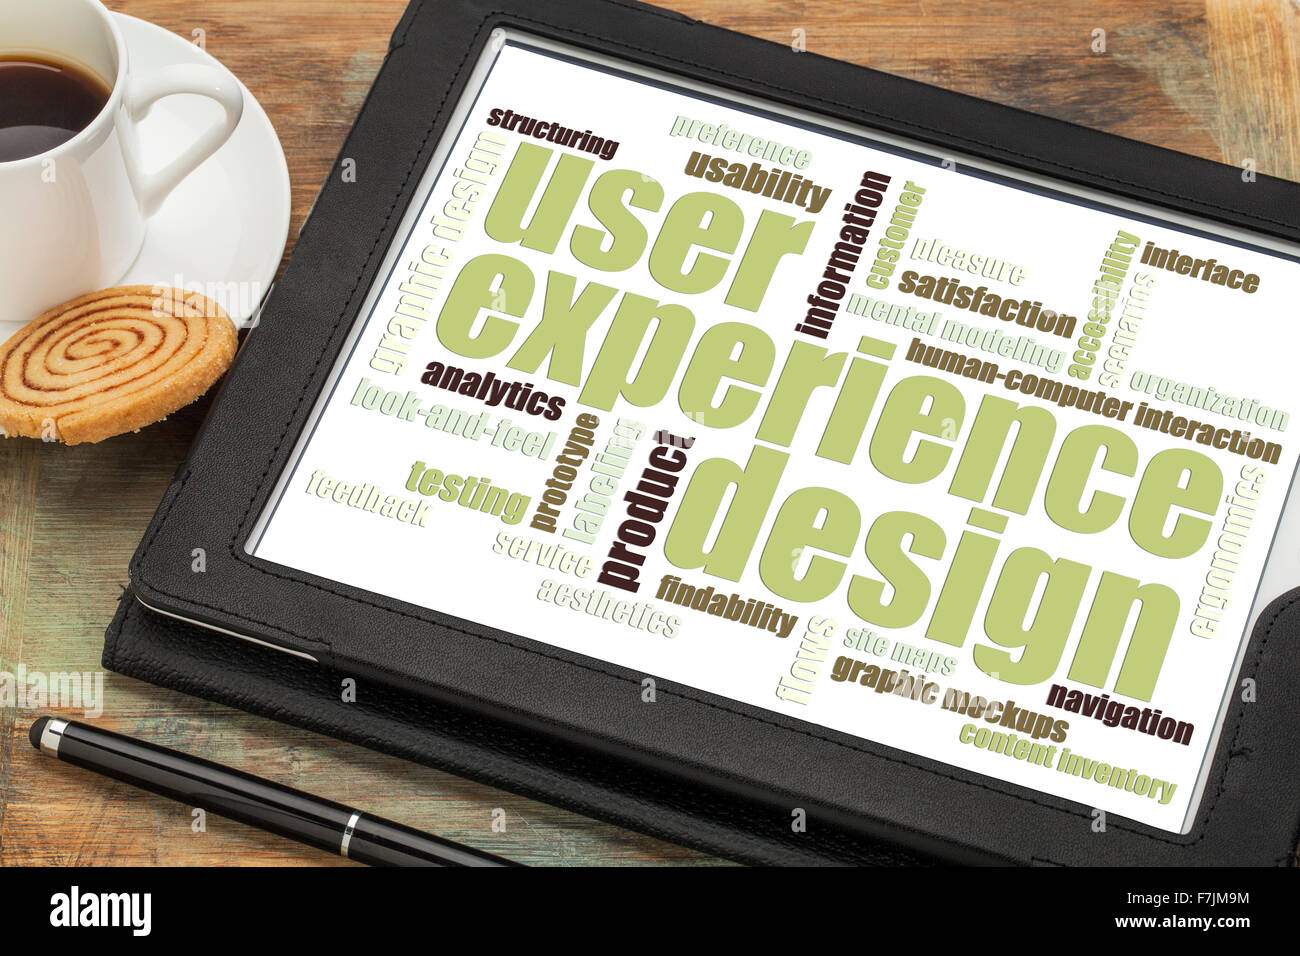 user experience design concept - word cloud on a digital tablet with a cup of coffee Stock Photo